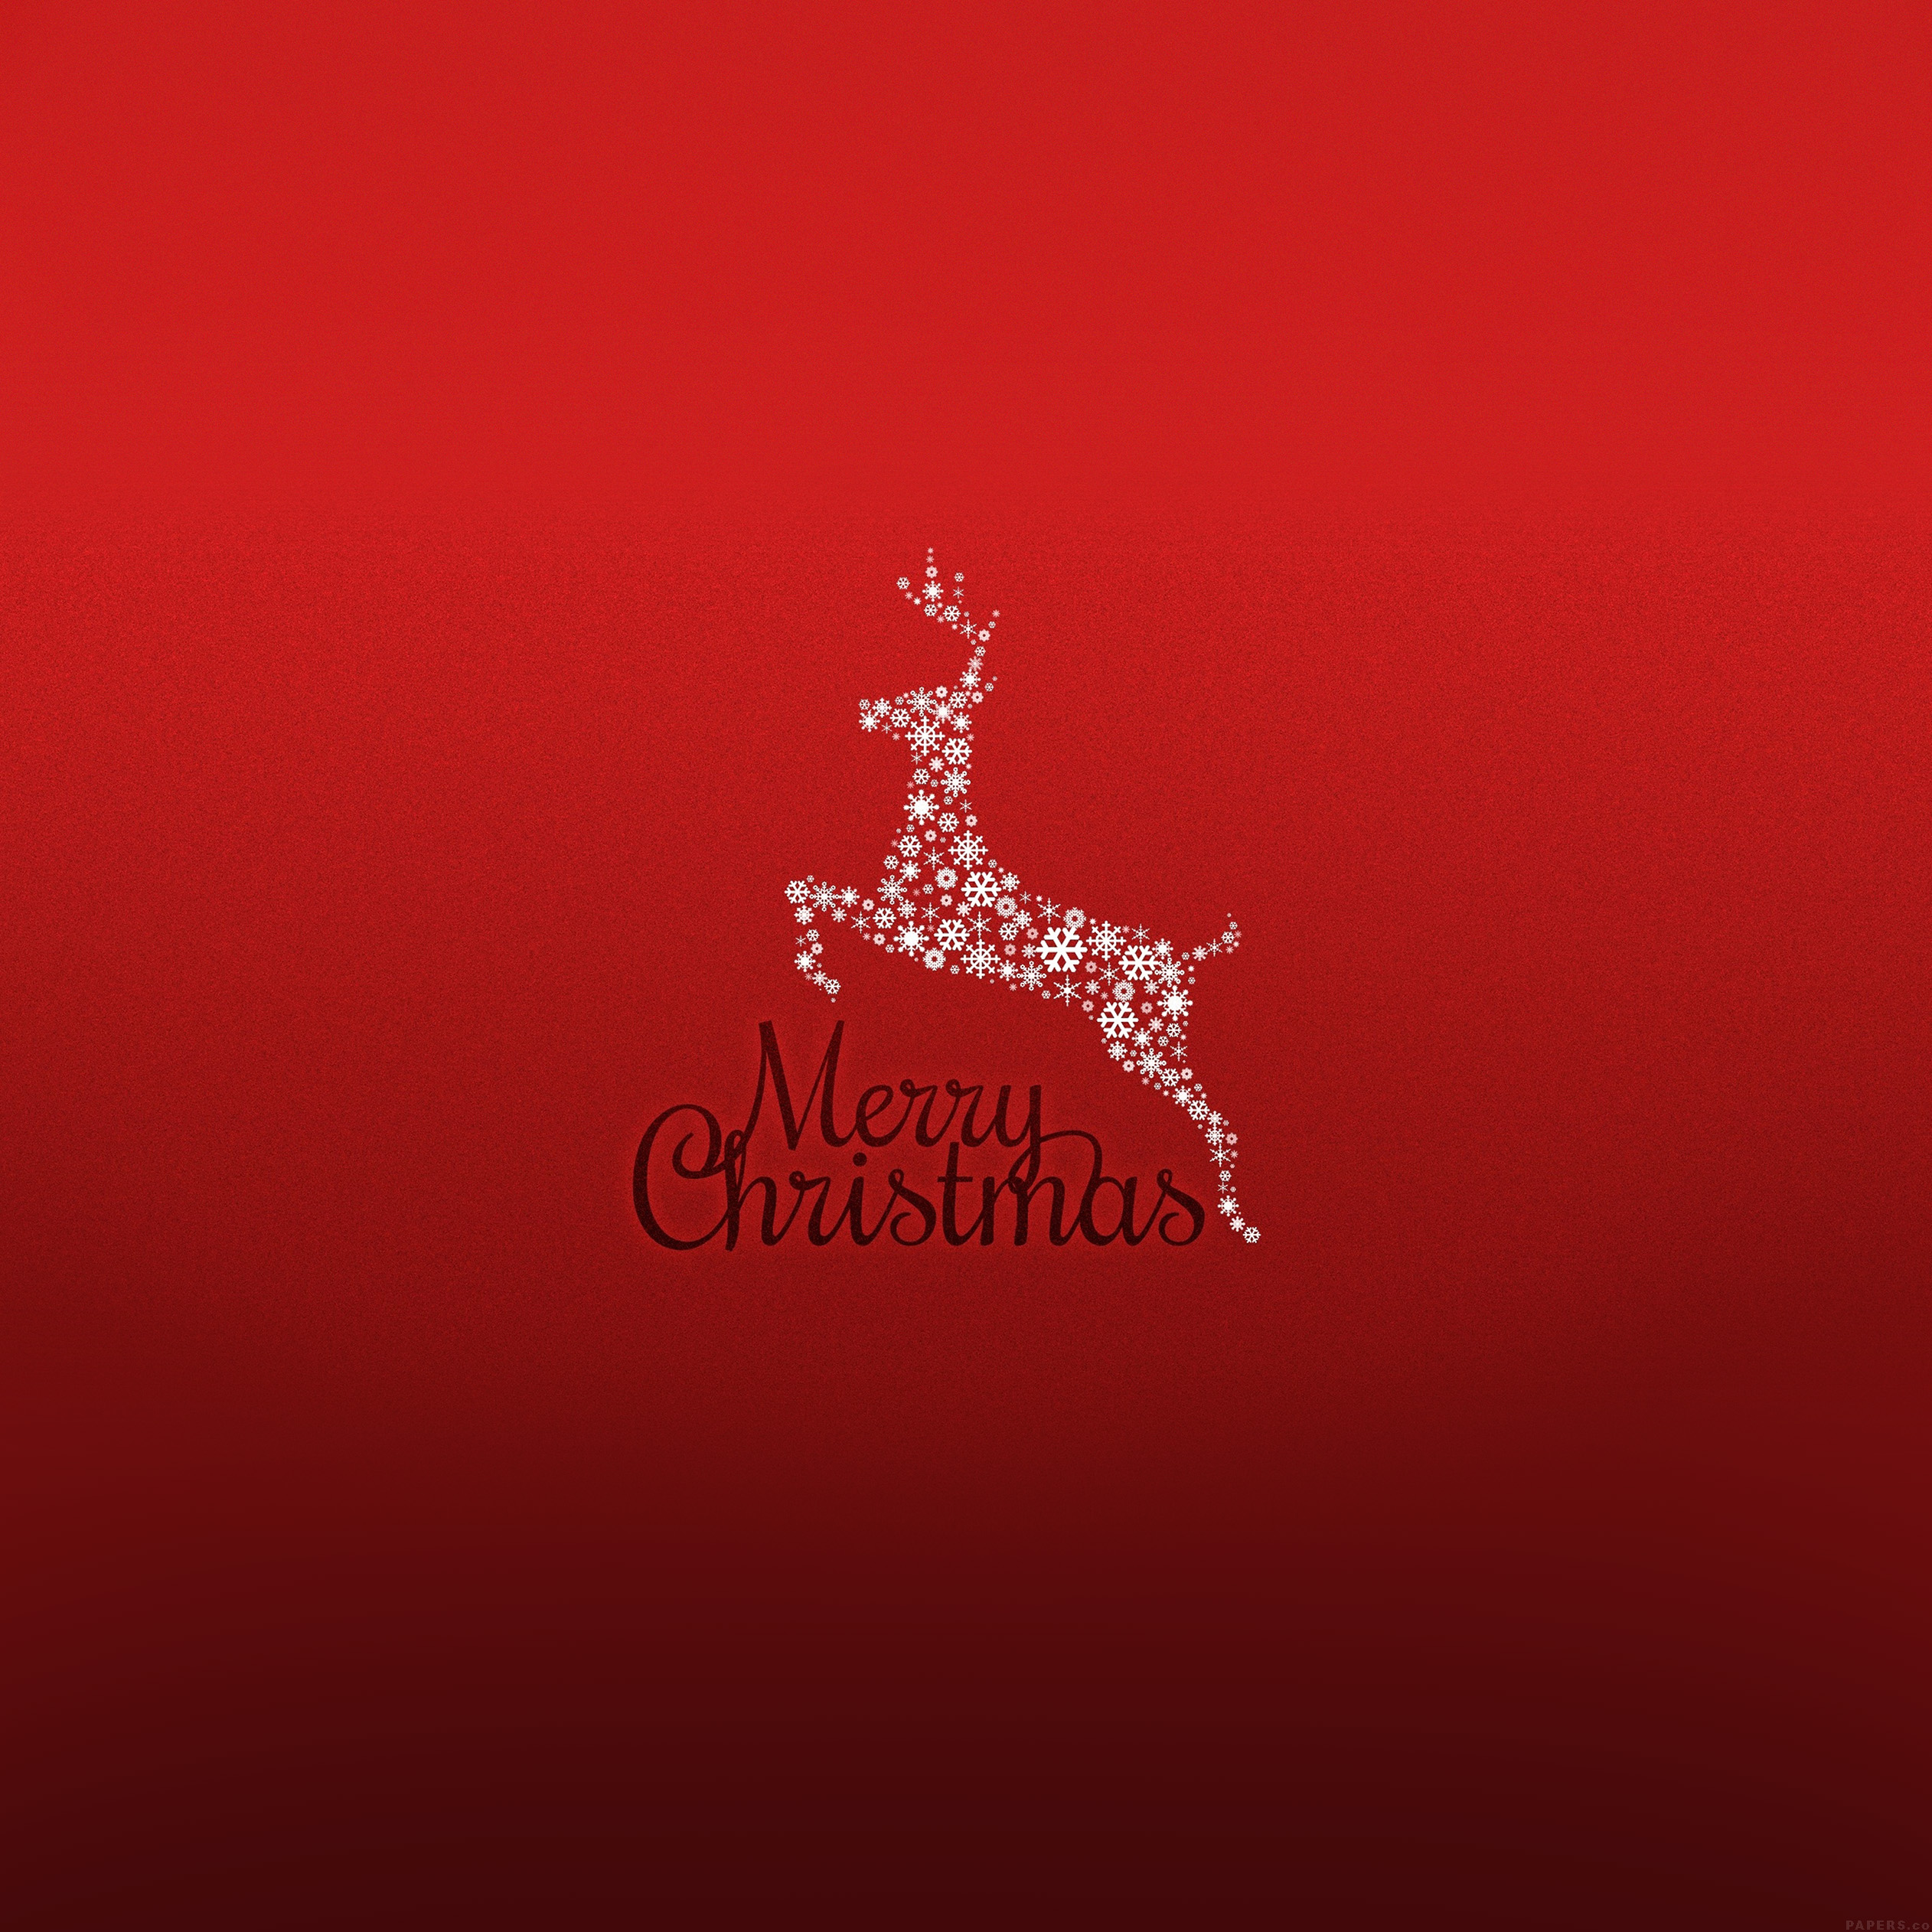 Festive Christmas wallpaper for iPhone and iPad